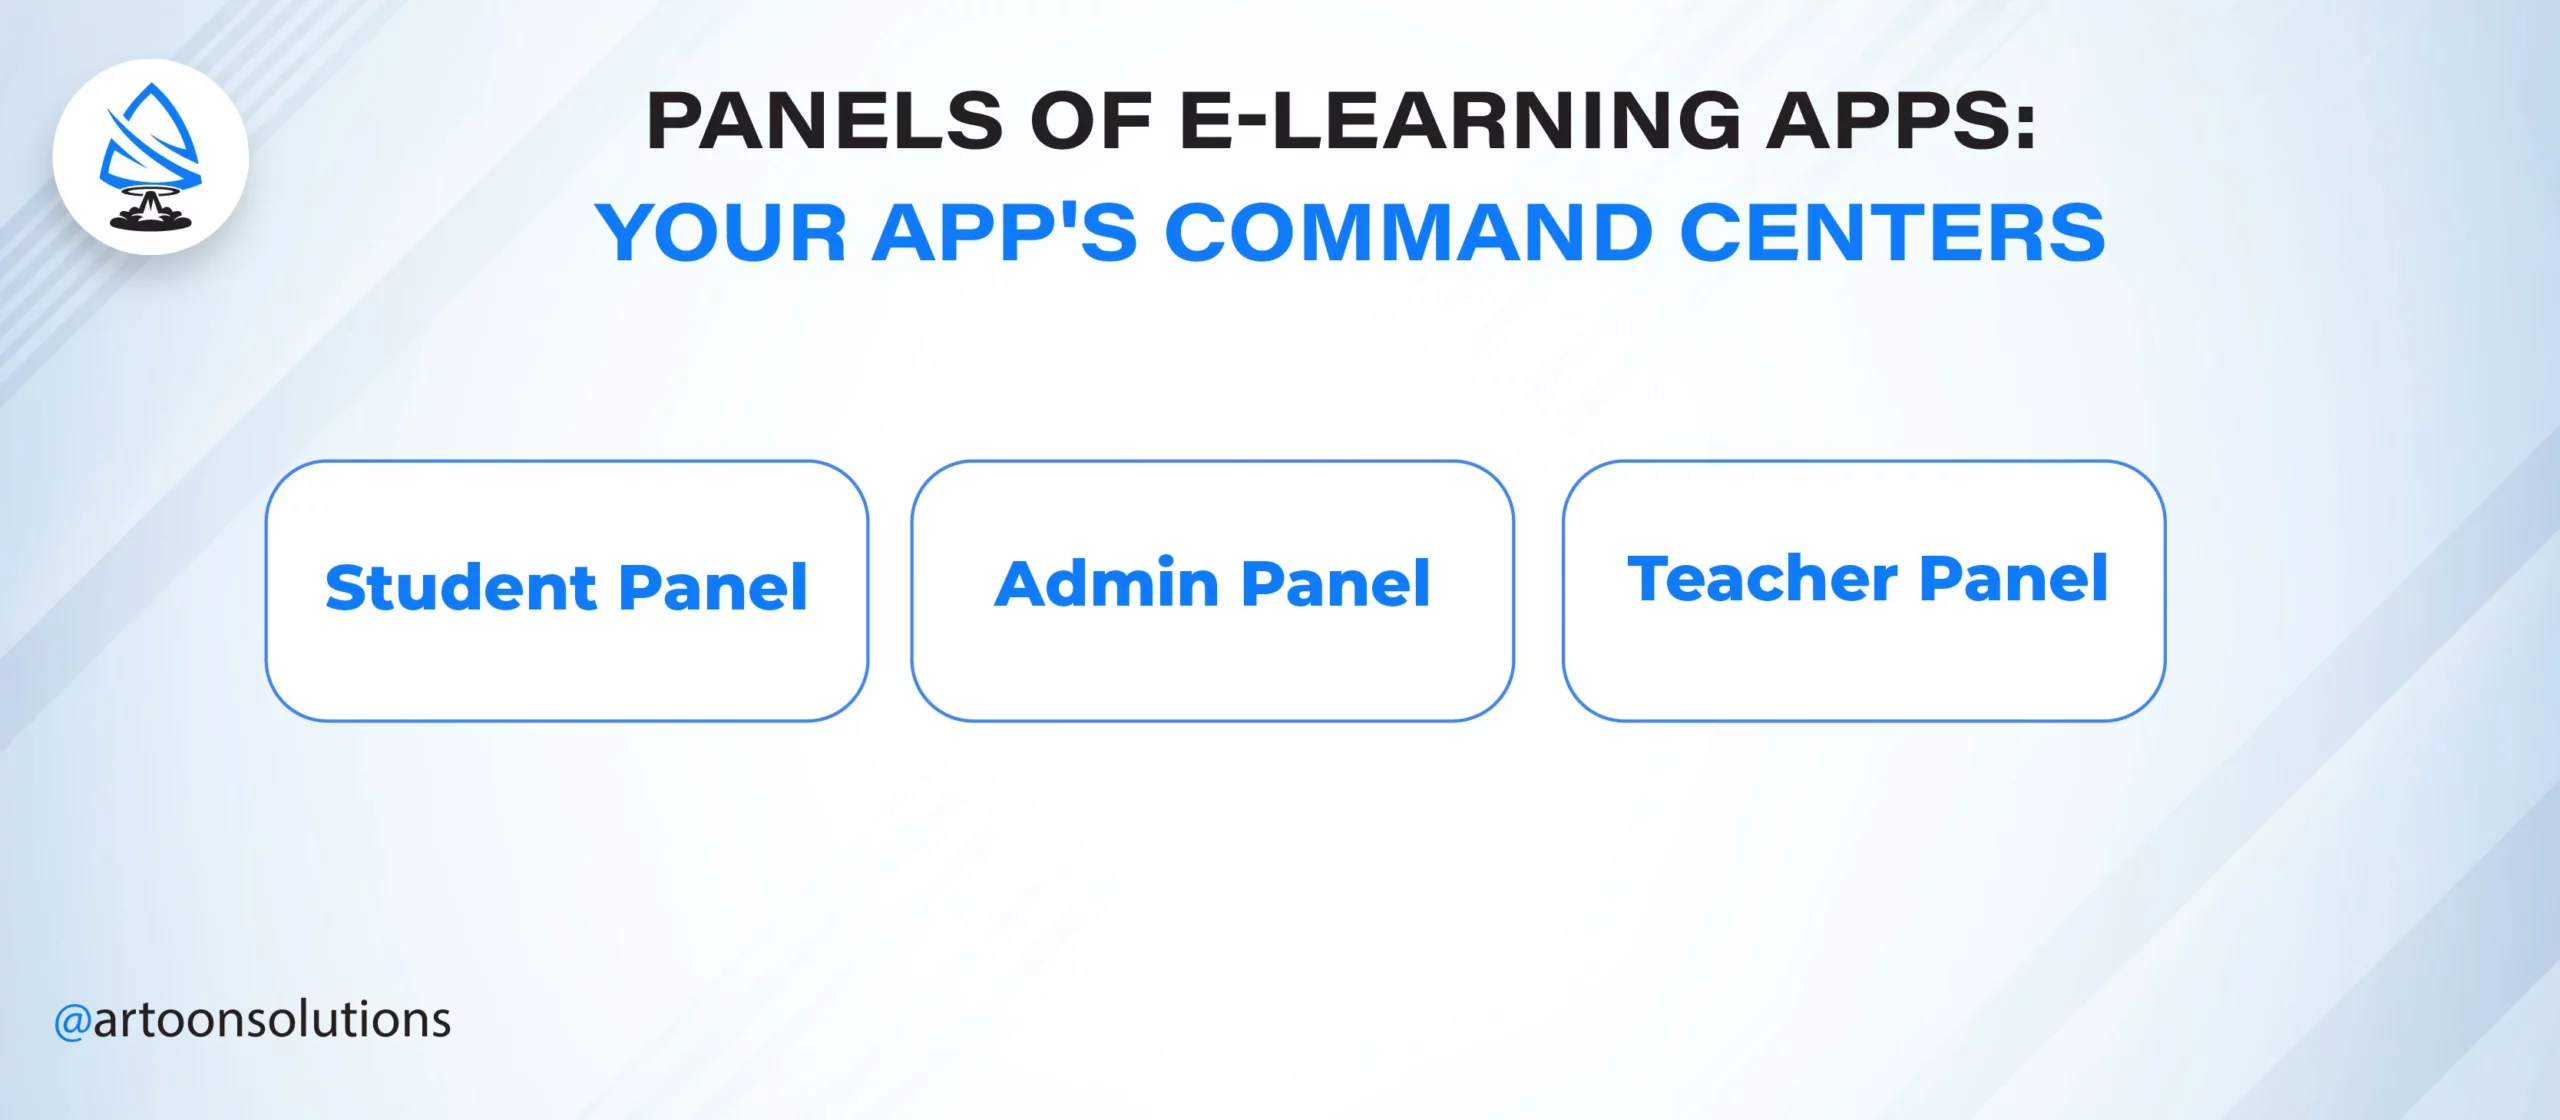 Panels of E-Learning Apps